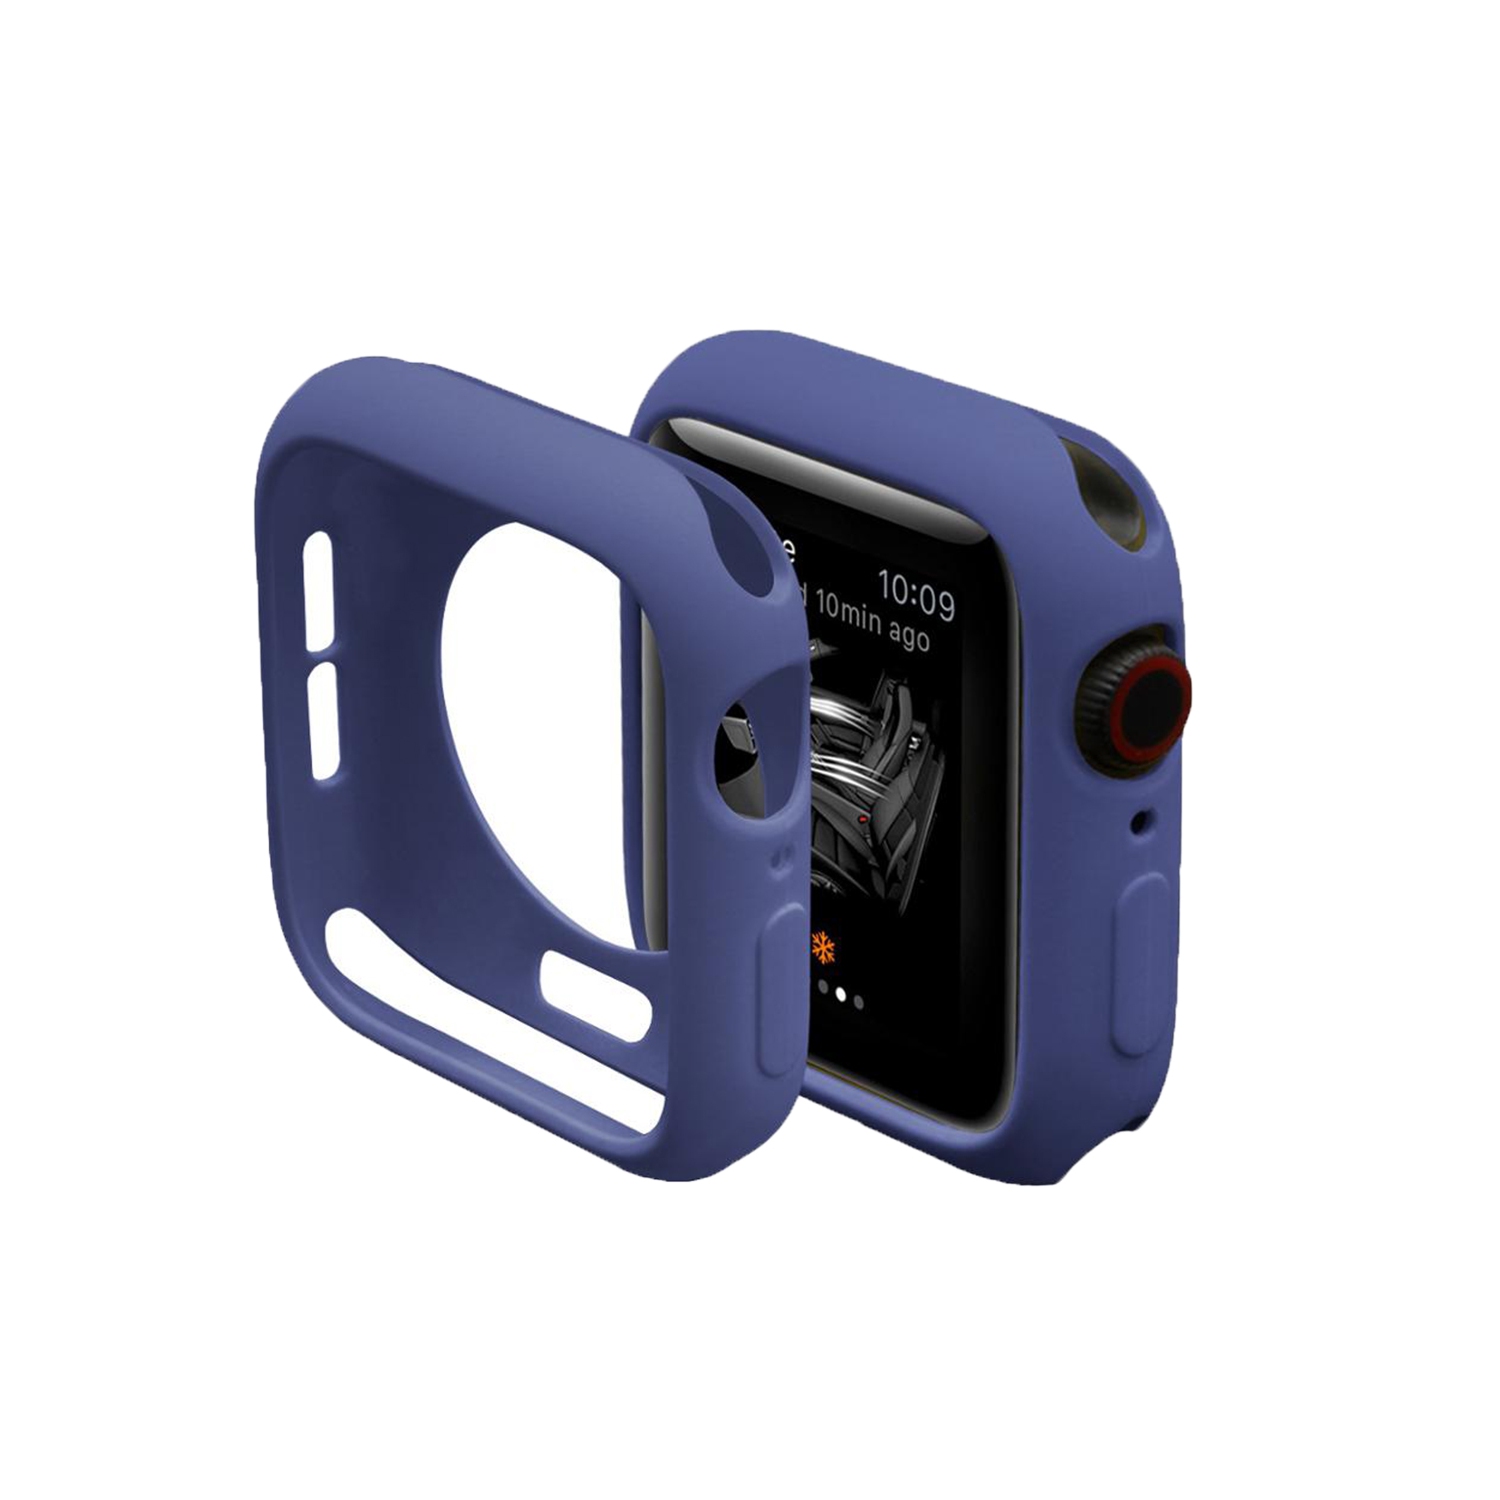 Ultra Thin Soft TPU Silicone Protective Shockproof Bumper Case Cover For 38mm Apple iWatch Series 1/2/3 - Navy Blue